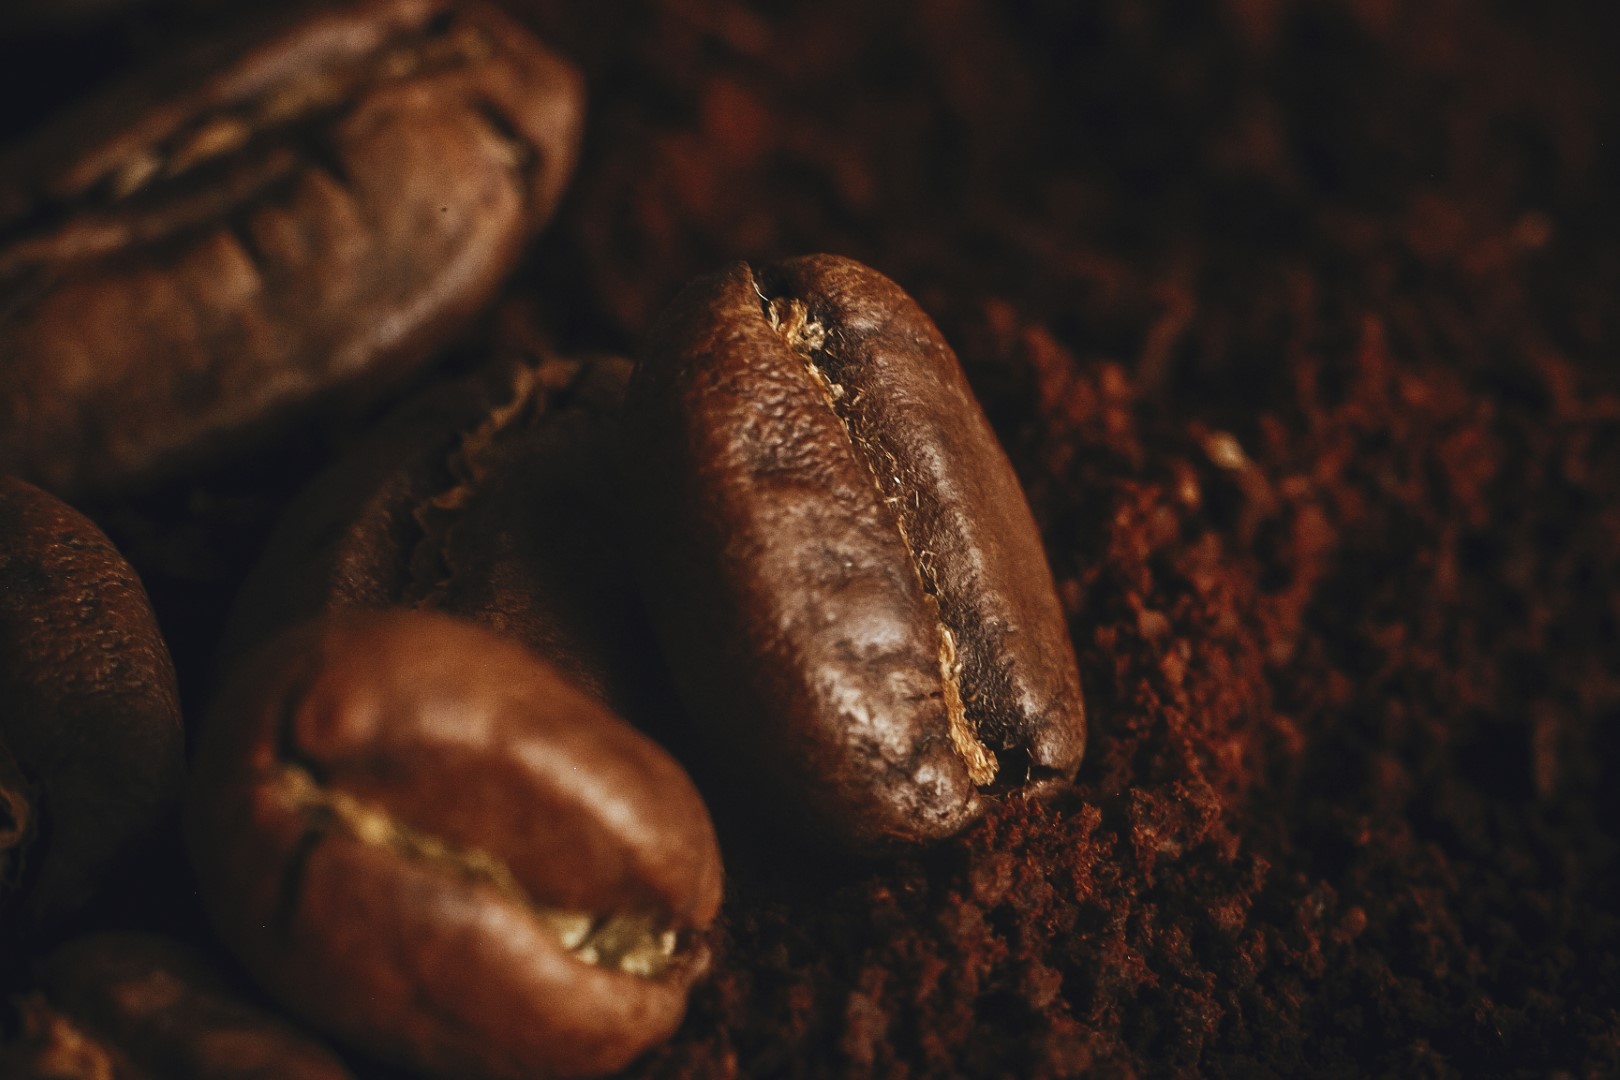 Coffee beans close up on grounded coffee pile. Fresh aromatic roasted coffee beans macro view. Space for text. Brown tone moody image